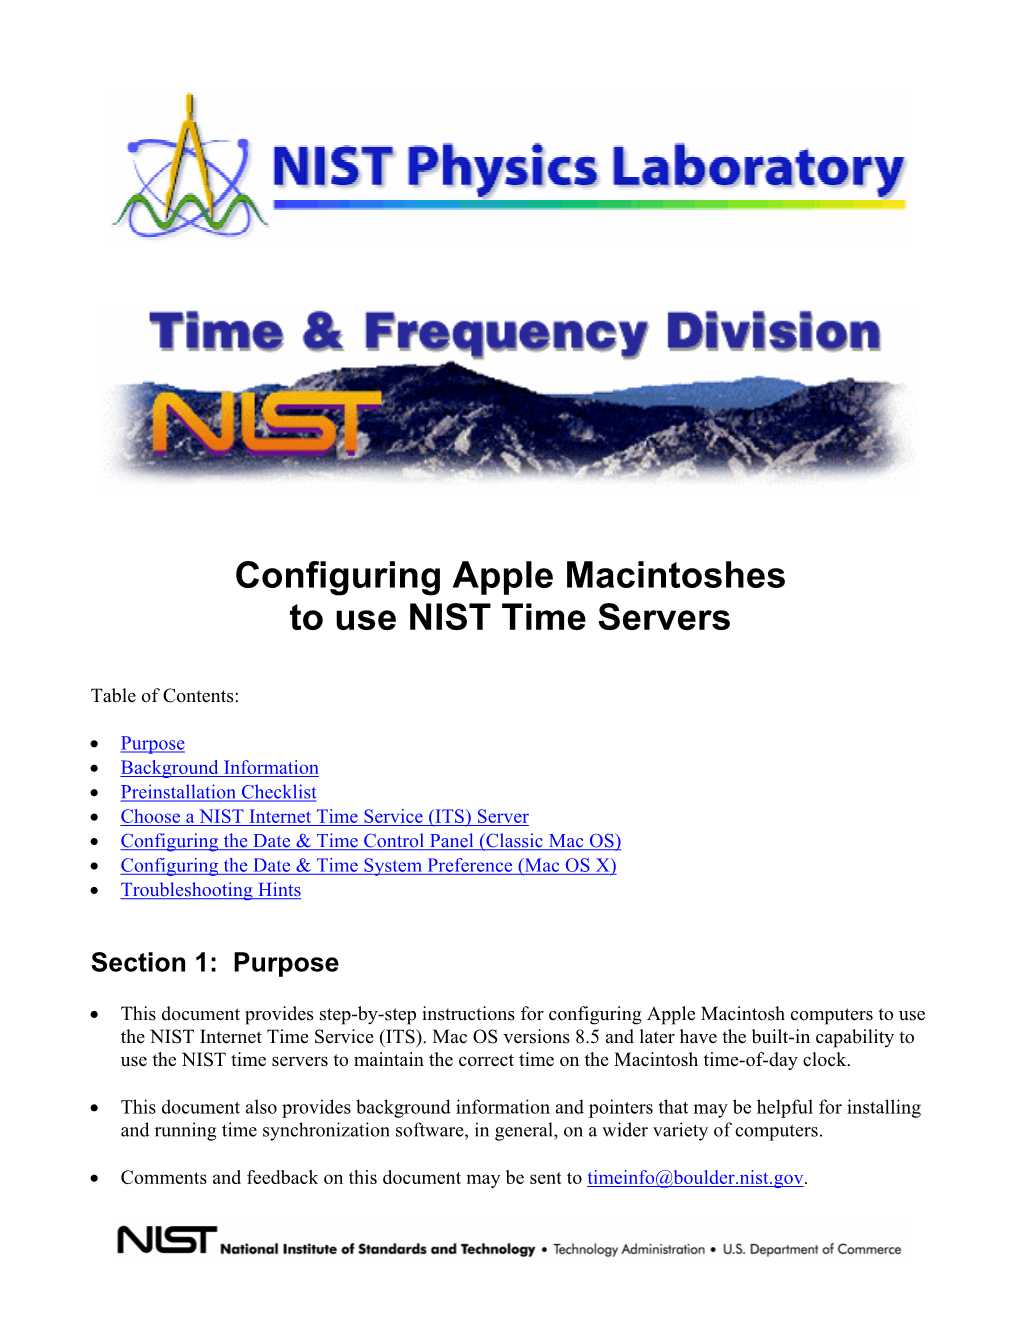 Configuring Apple Macintoshes to Use NIST Time Servers